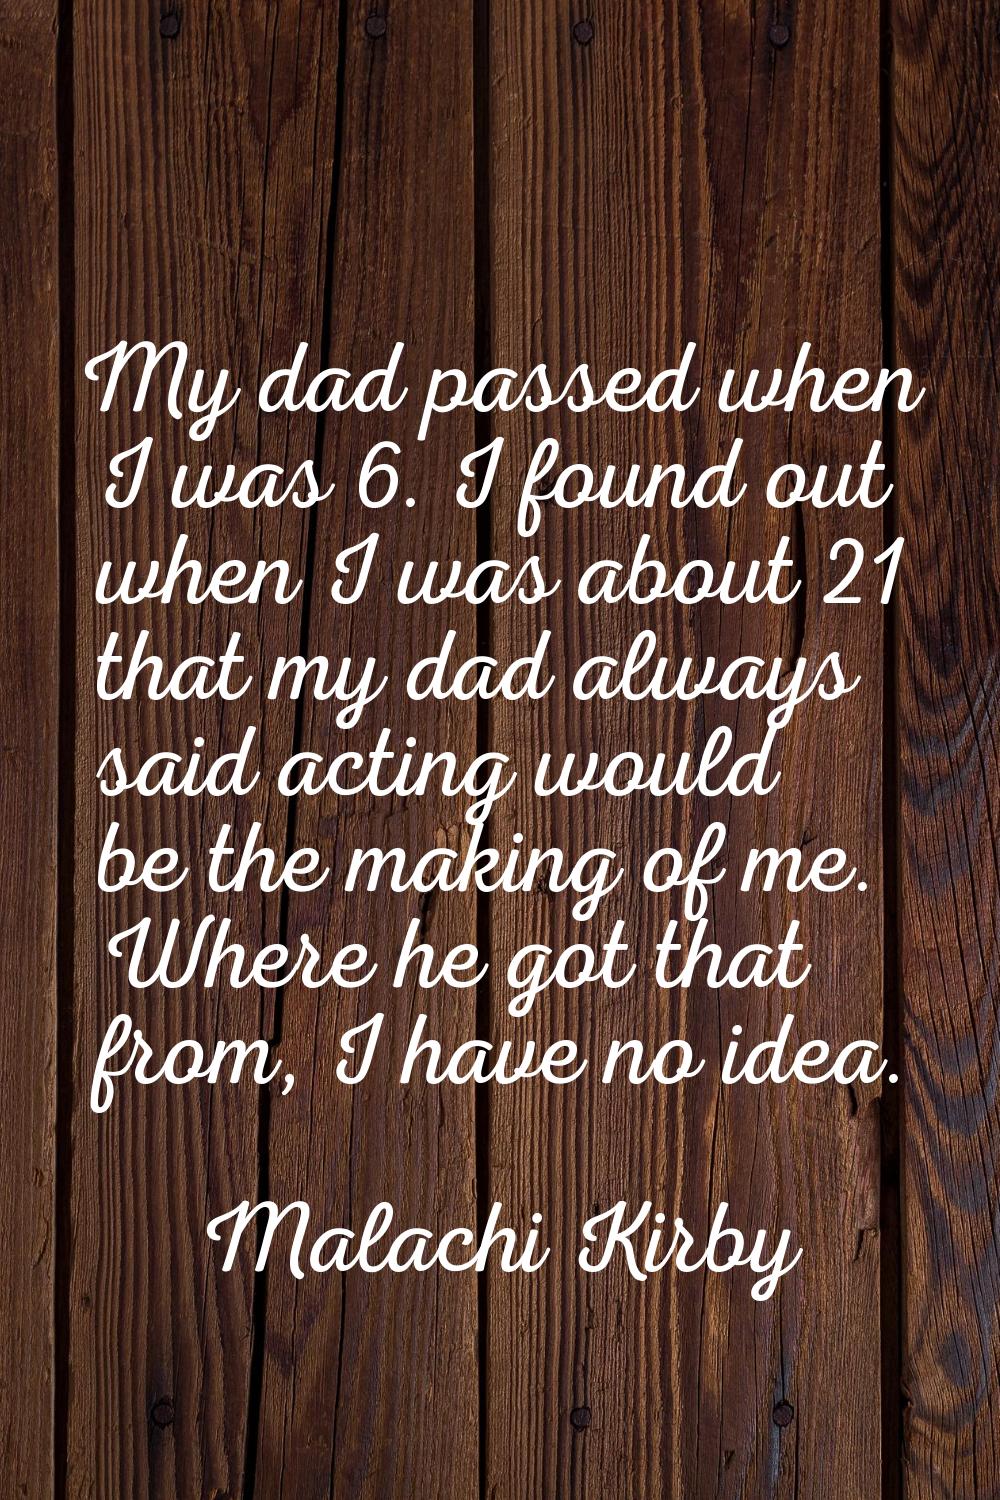 My dad passed when I was 6. I found out when I was about 21 that my dad always said acting would be